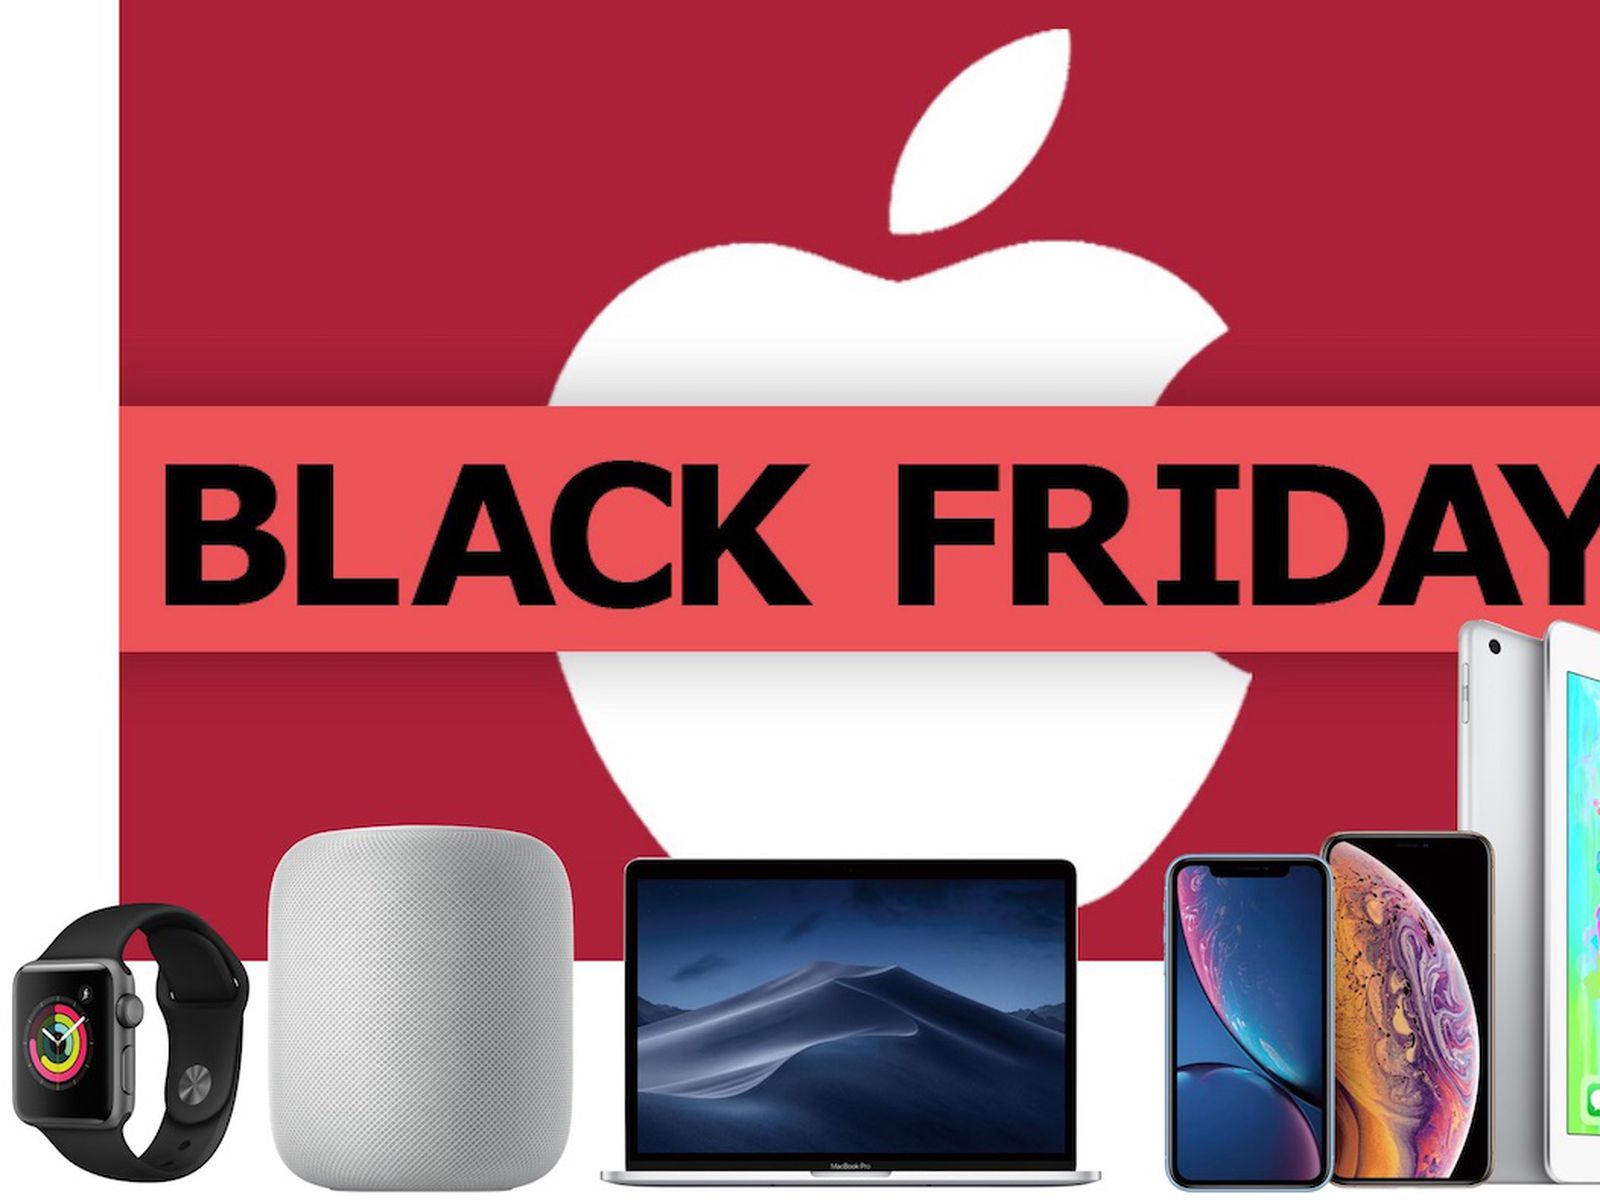 Kohl's Black Friday Ad Breaks Cover With Fantastic Deals On Google Home  Hub, Xbox One X, Echo Dot